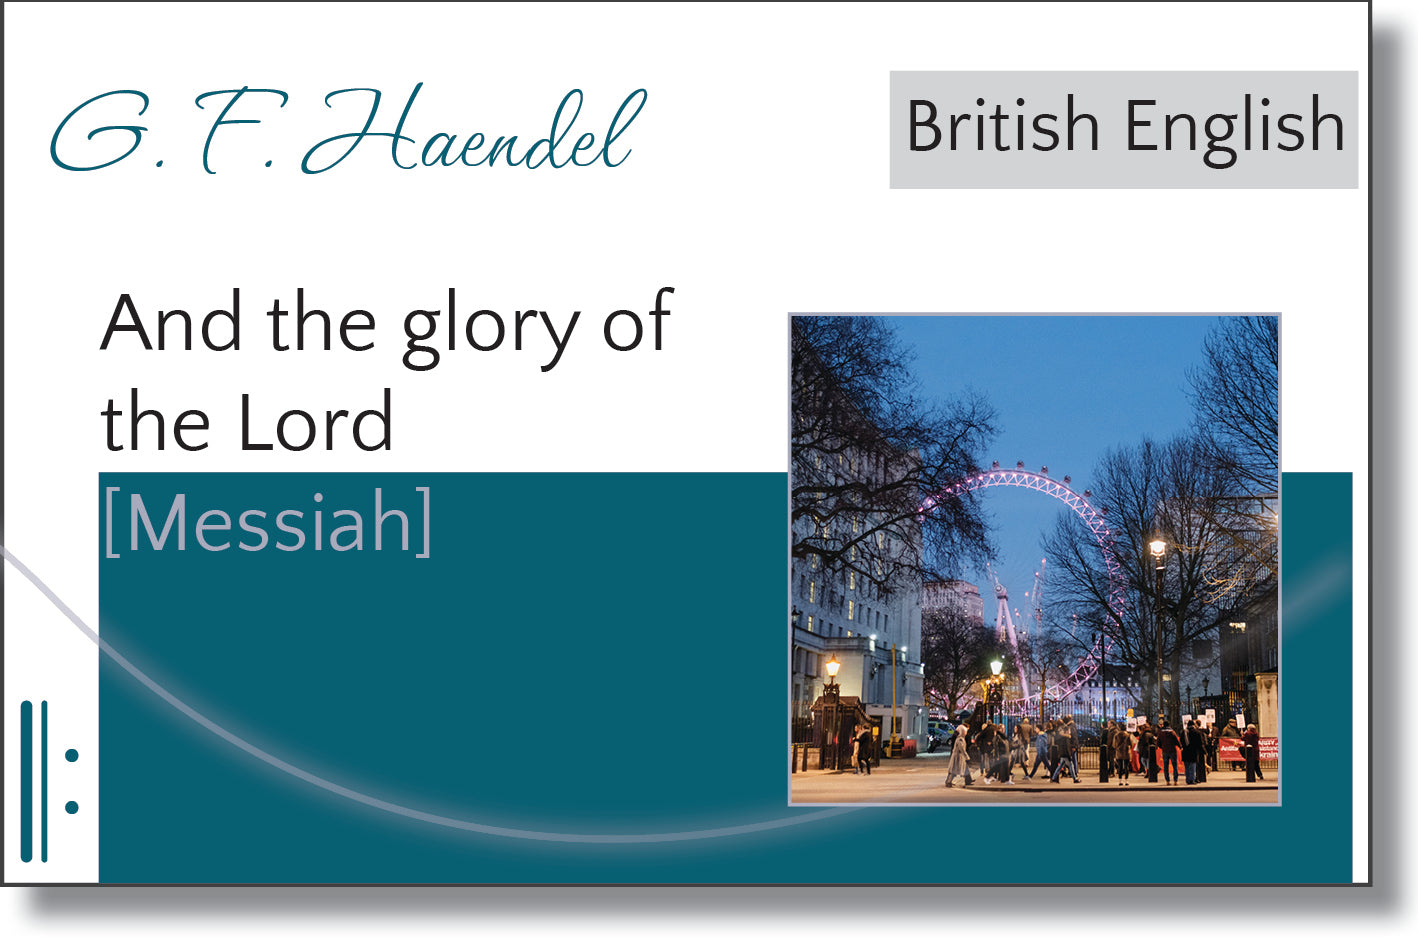 Messiah - And the glory of the Lord